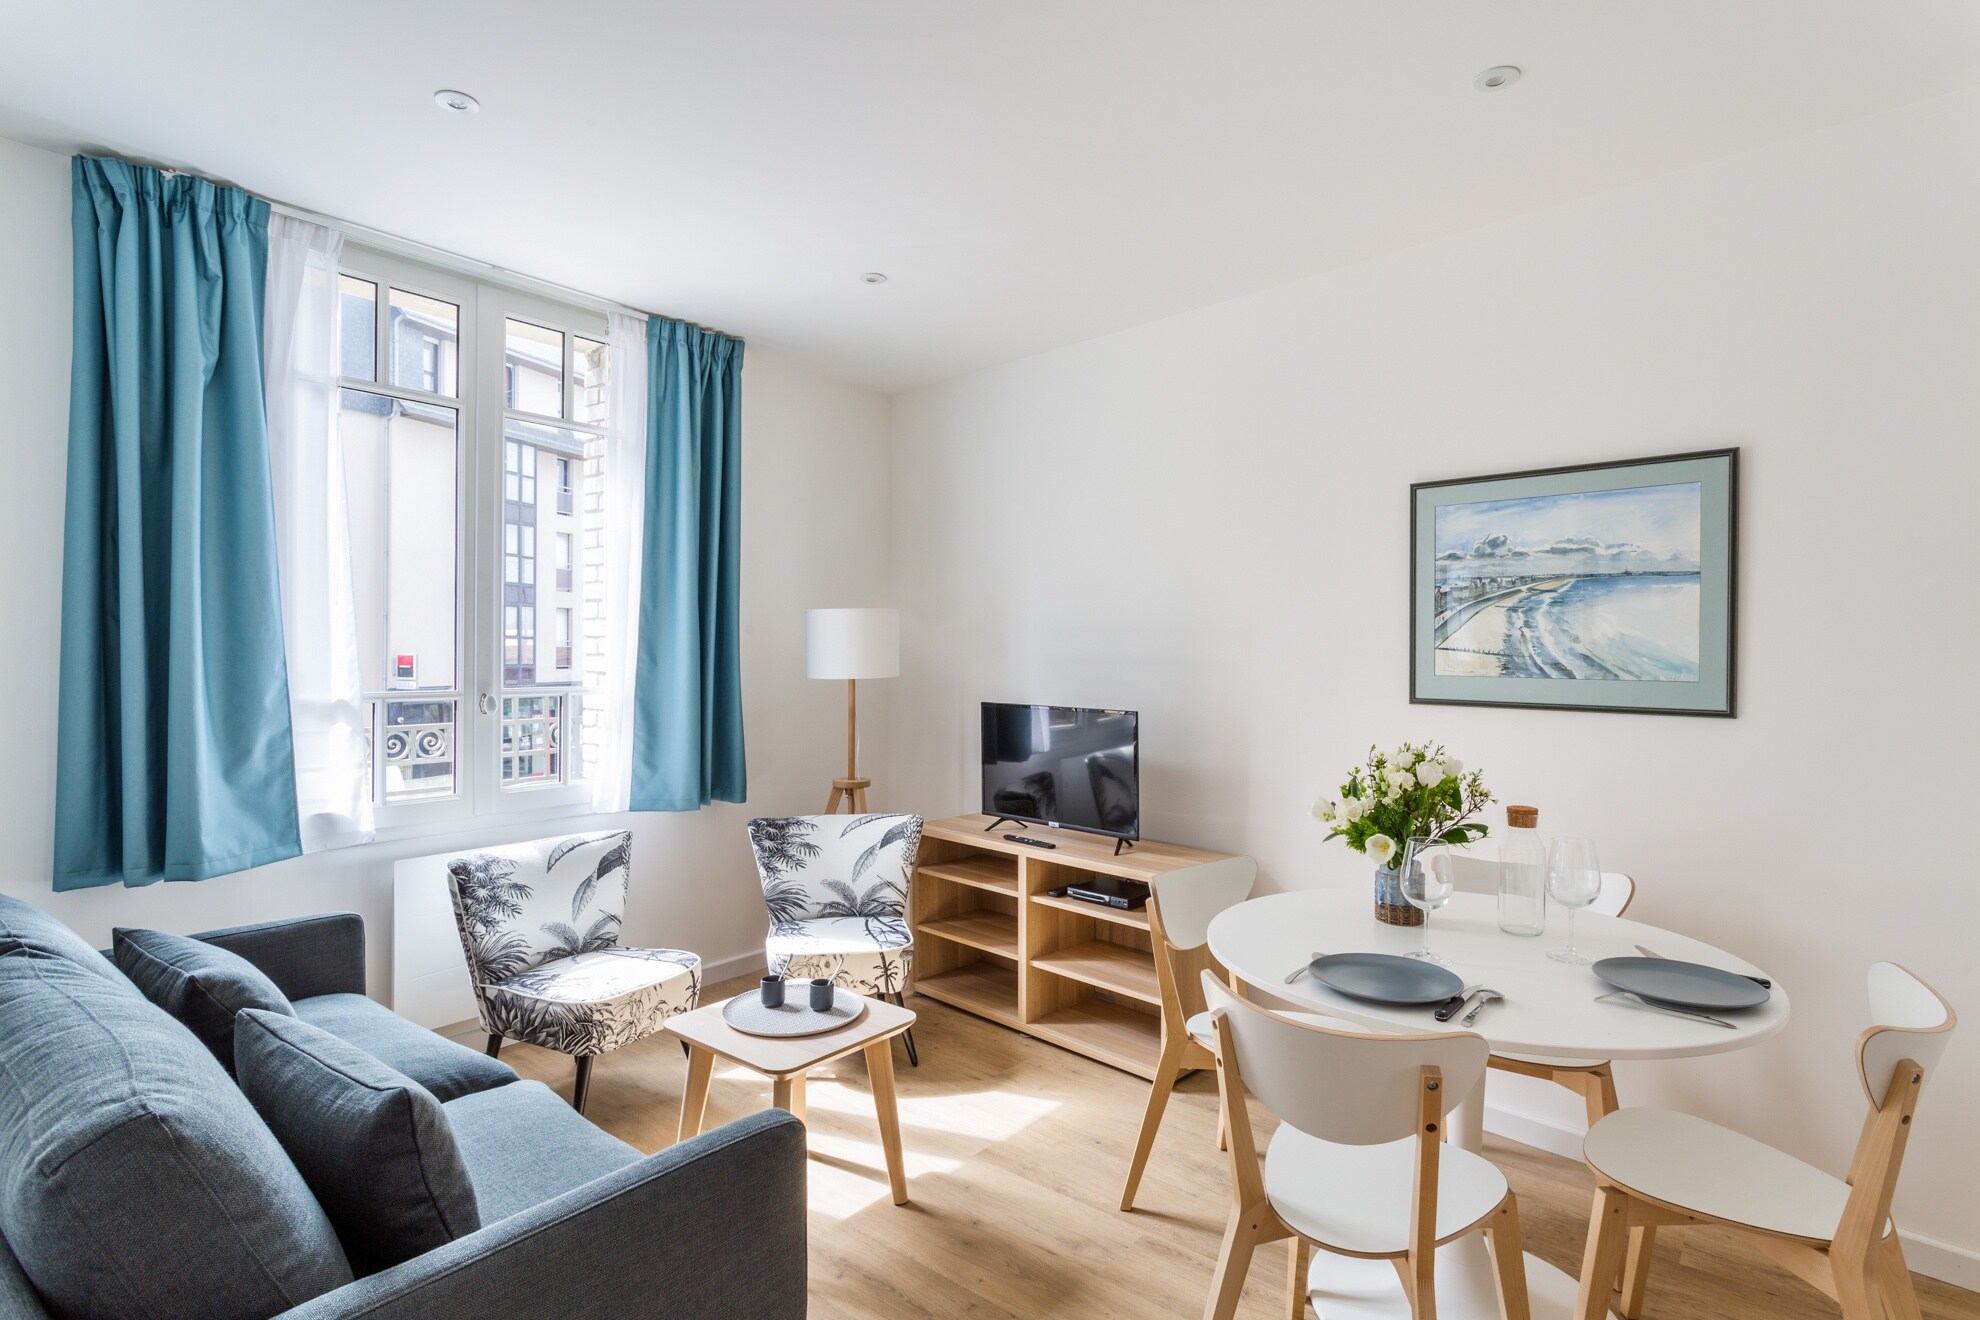 Property Image 1 - Airy and bright one bedroom flat in Saint-Malo